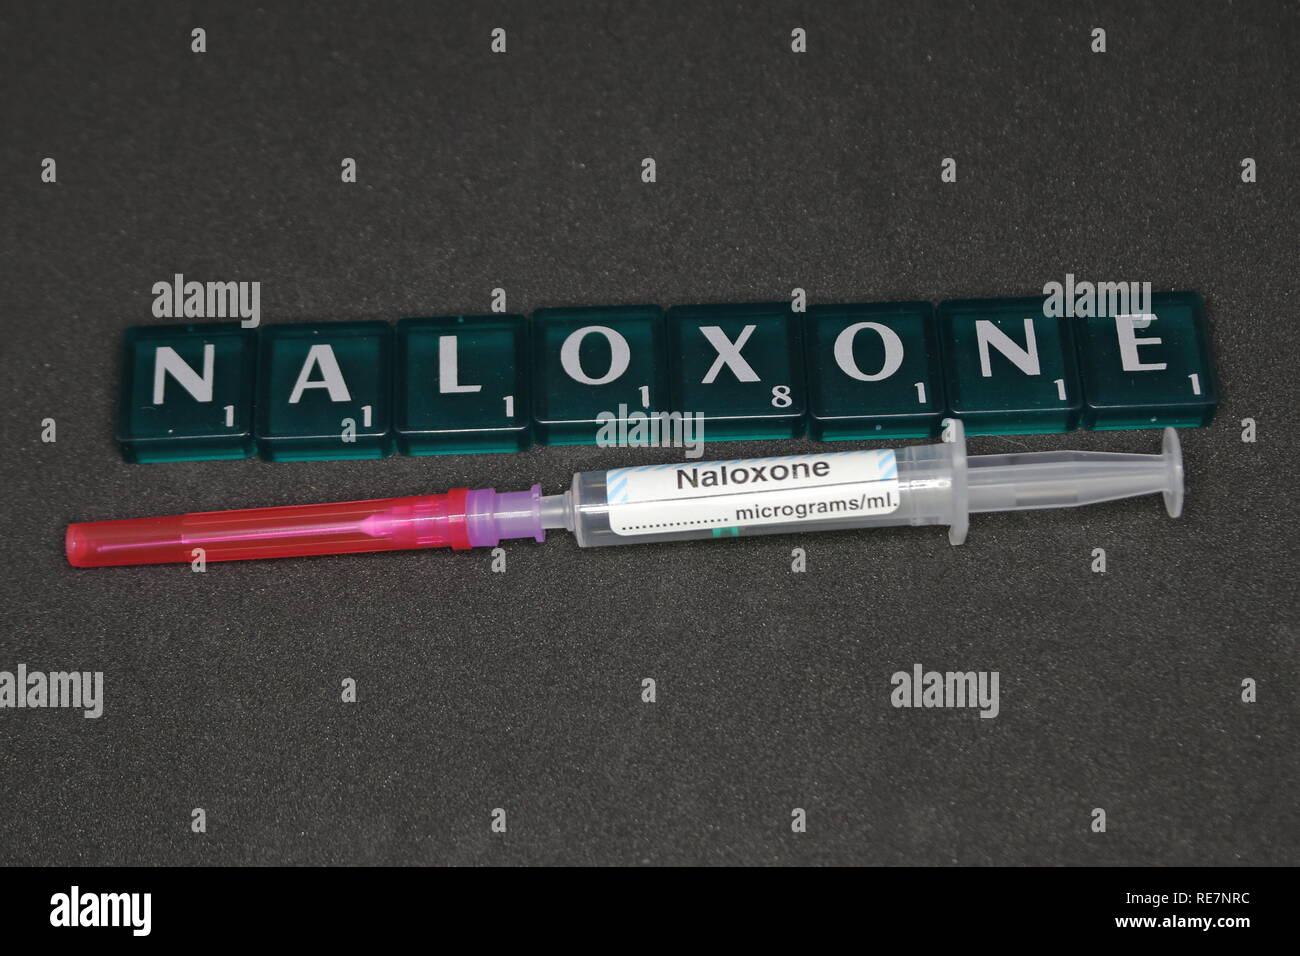 A 2ml Syringe labelled Naloxone and filter / drawing up needle with a word game tiles spelling out Naloxone. Stock Photo